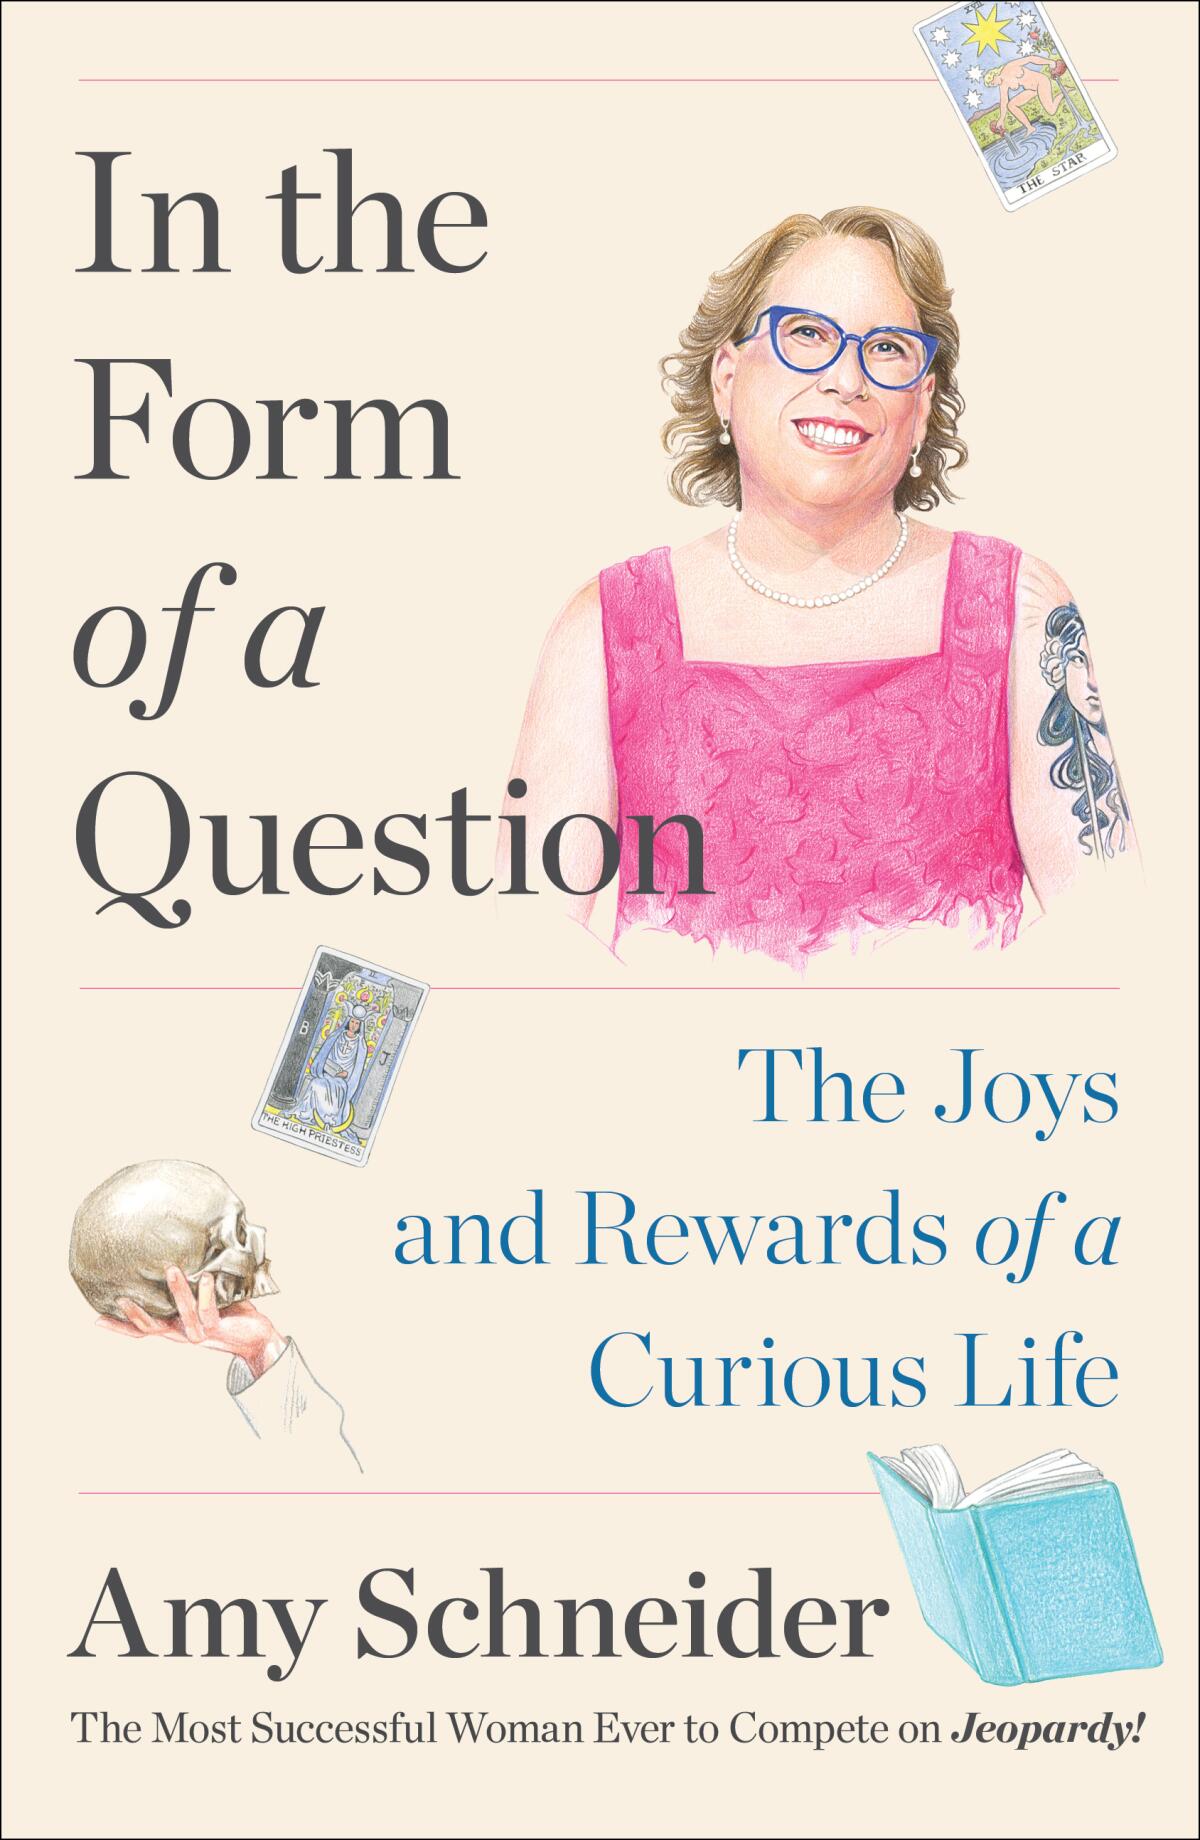 "In the Form of a Question," by Amy Schneider